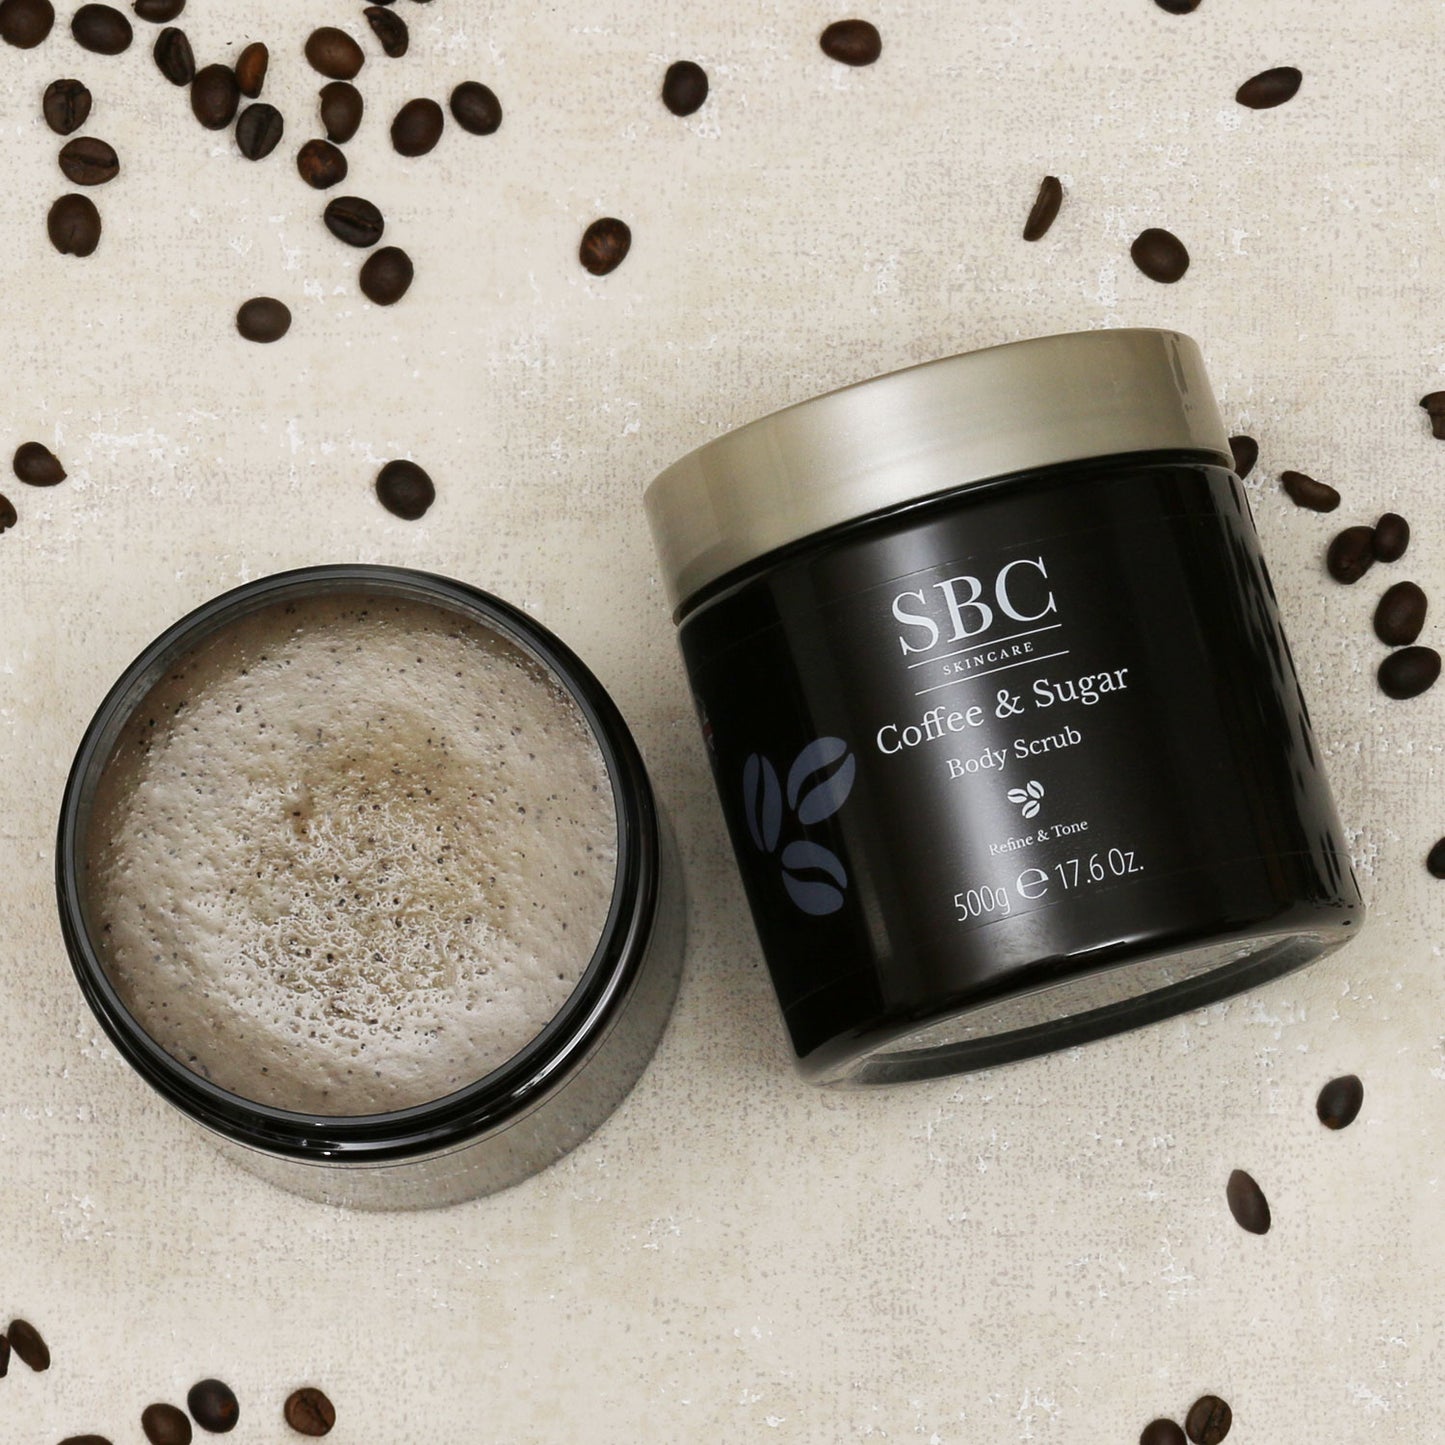 Two Coffee & Sugar Body Scrubs on a beige textured background with coffee beans sprinkled around 